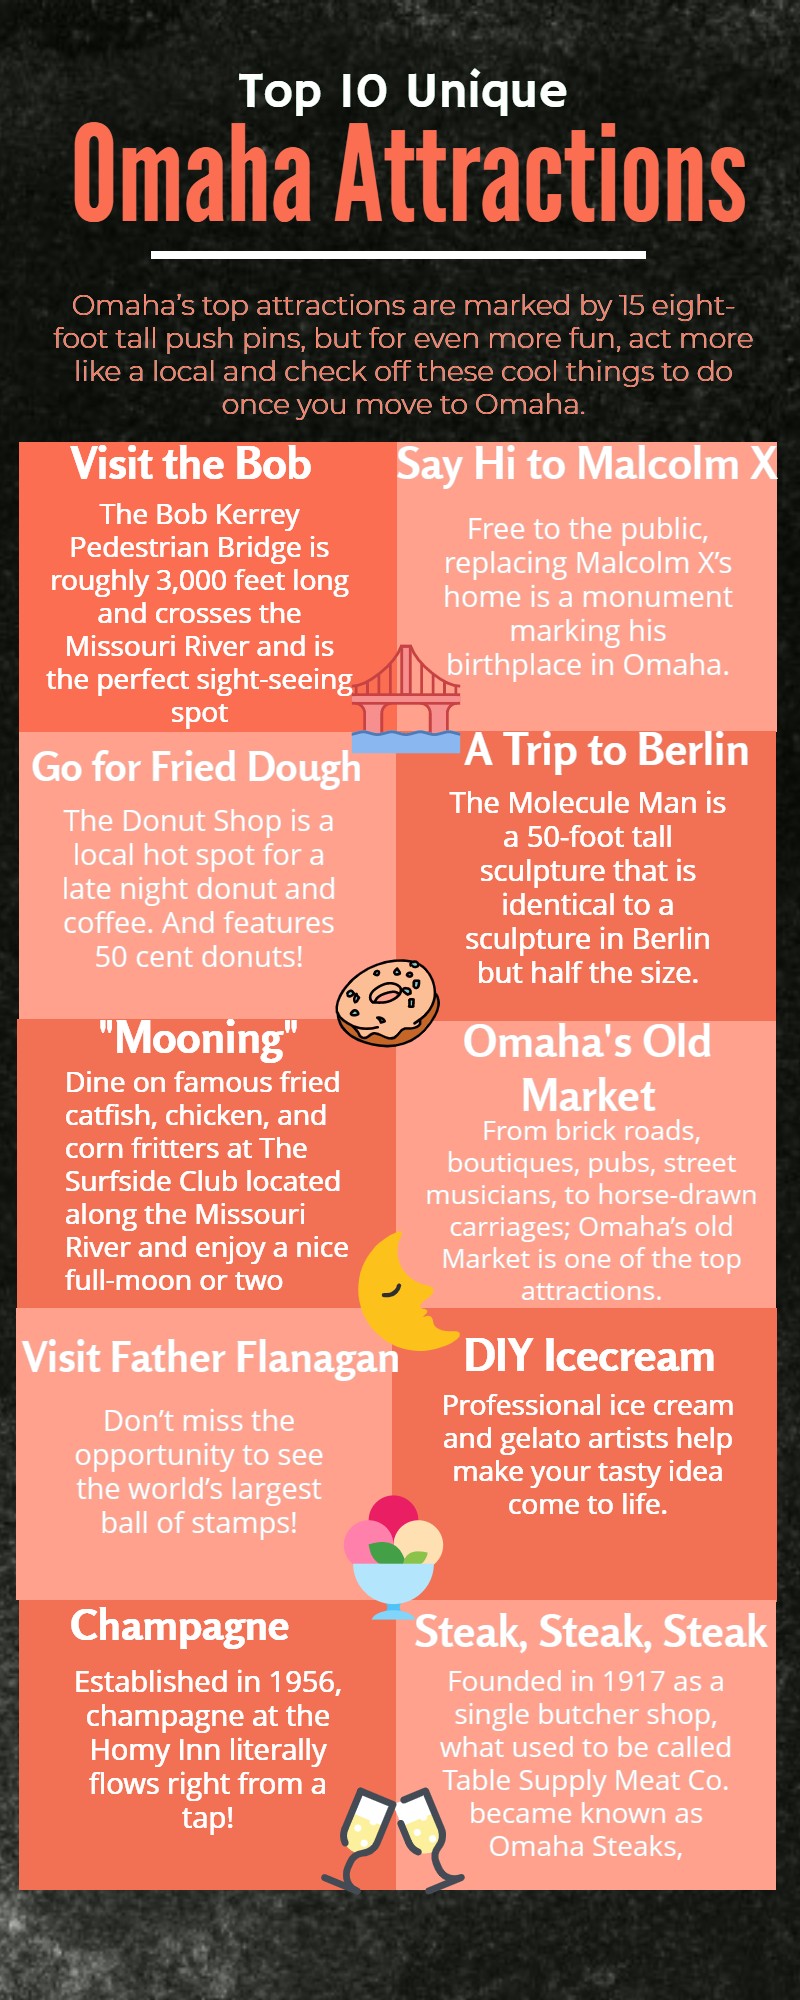 Top 10 Unique Omaha Attractions Infographic